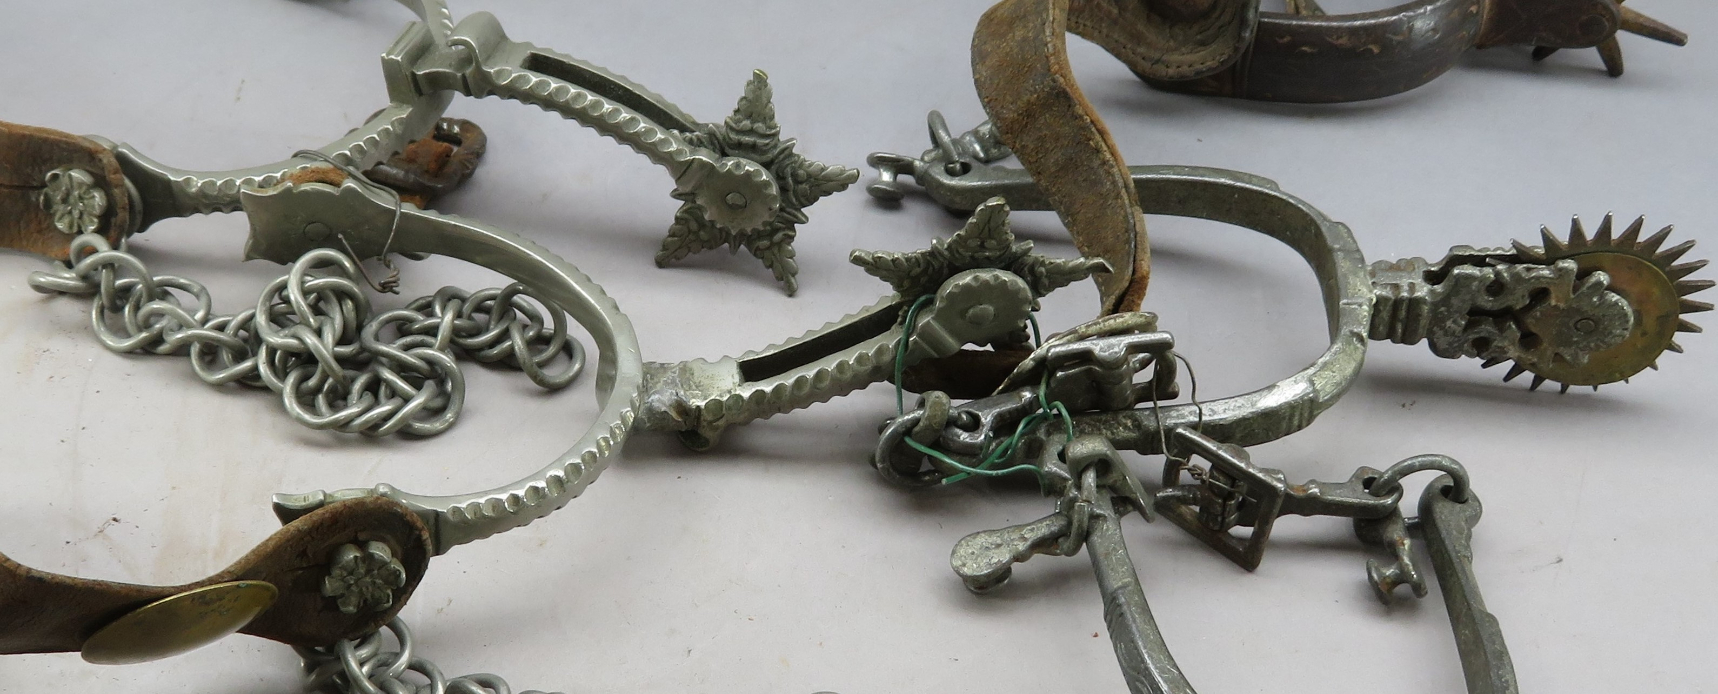 Ⓦ TWO PAIRS OF SOUTH AMERICAN ROWEL SPURS AND ANOTHER^ LATE 19TH CENTURY/20TH CENTURY